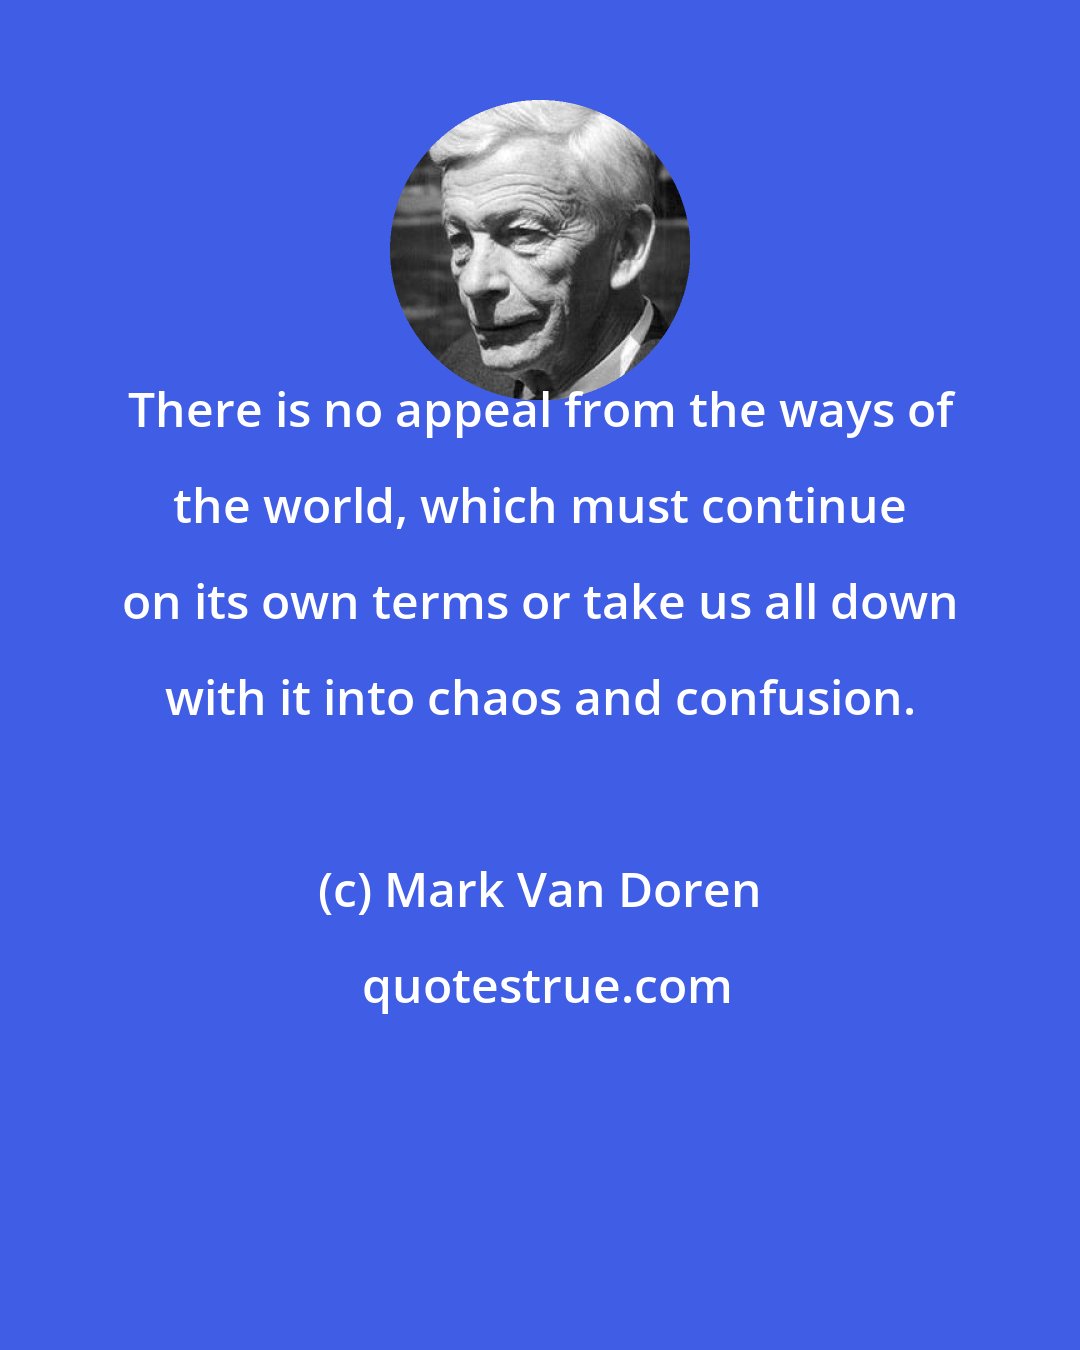 Mark Van Doren: There is no appeal from the ways of the world, which must continue on its own terms or take us all down with it into chaos and confusion.